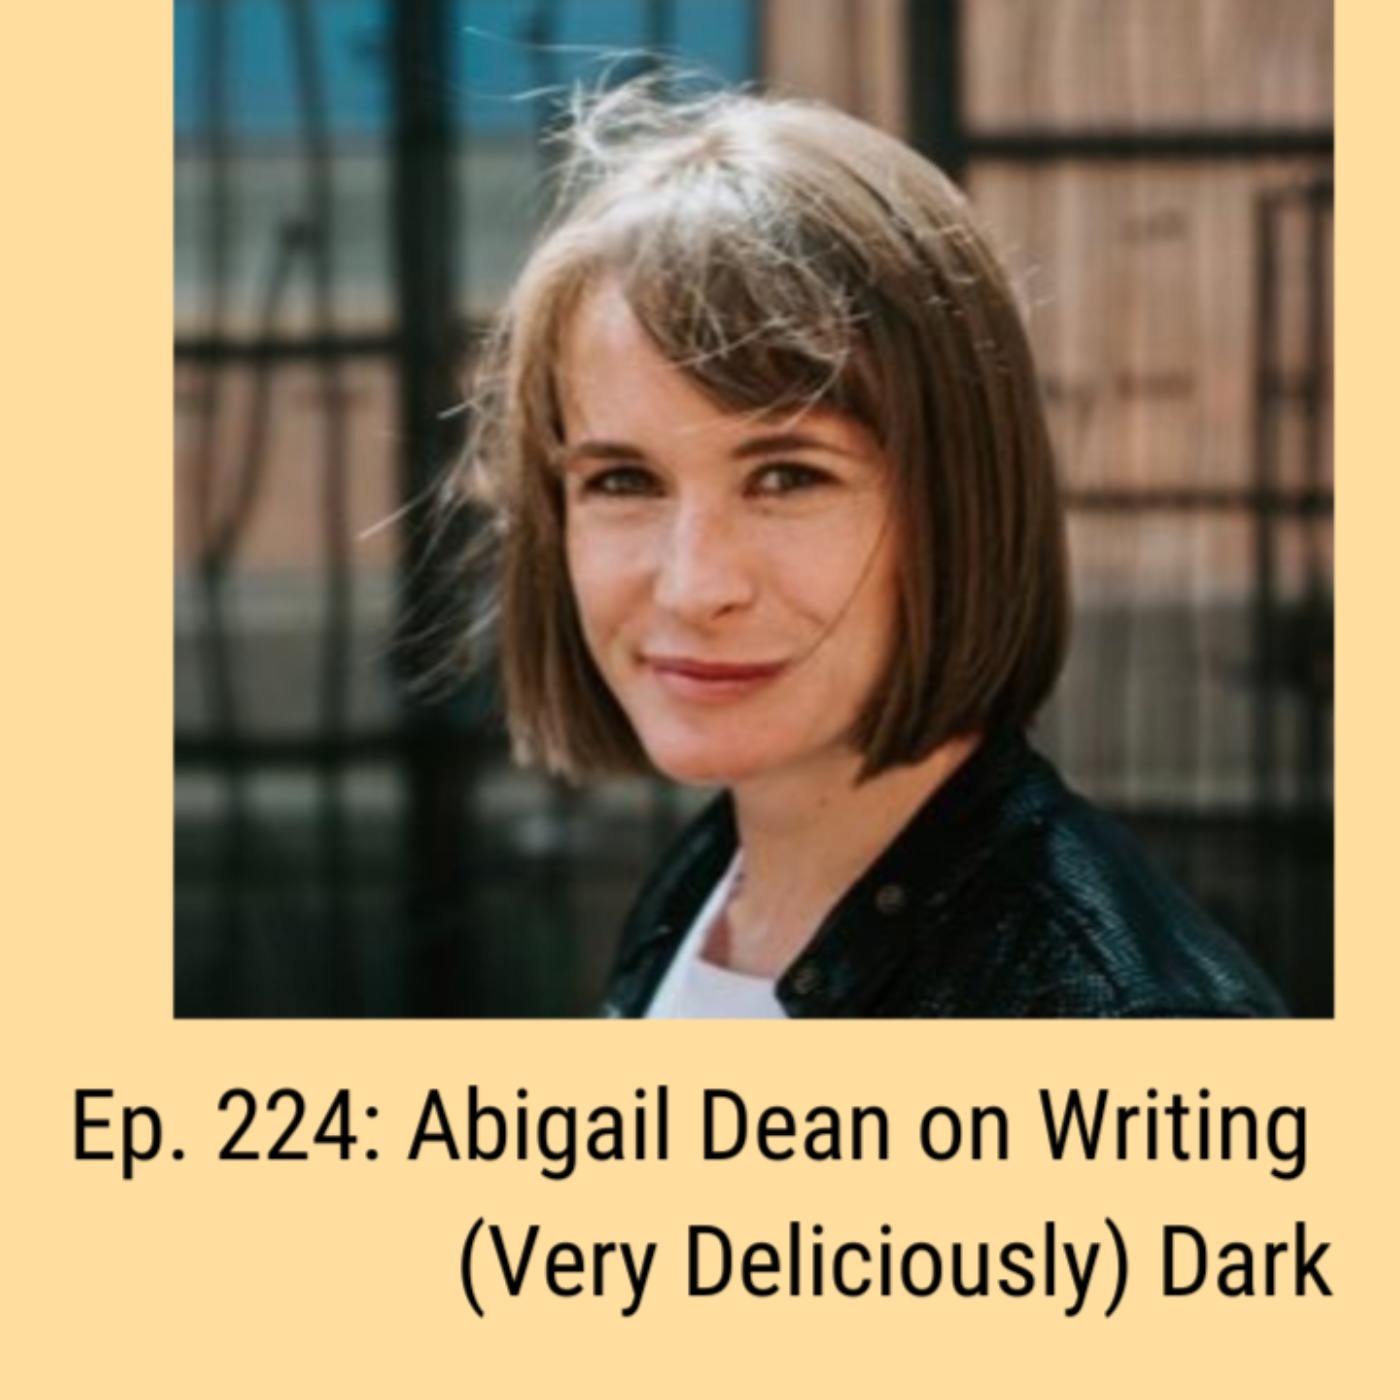 Ep. 224: Abigail Dean on Writing (Very Deliciously) Dark